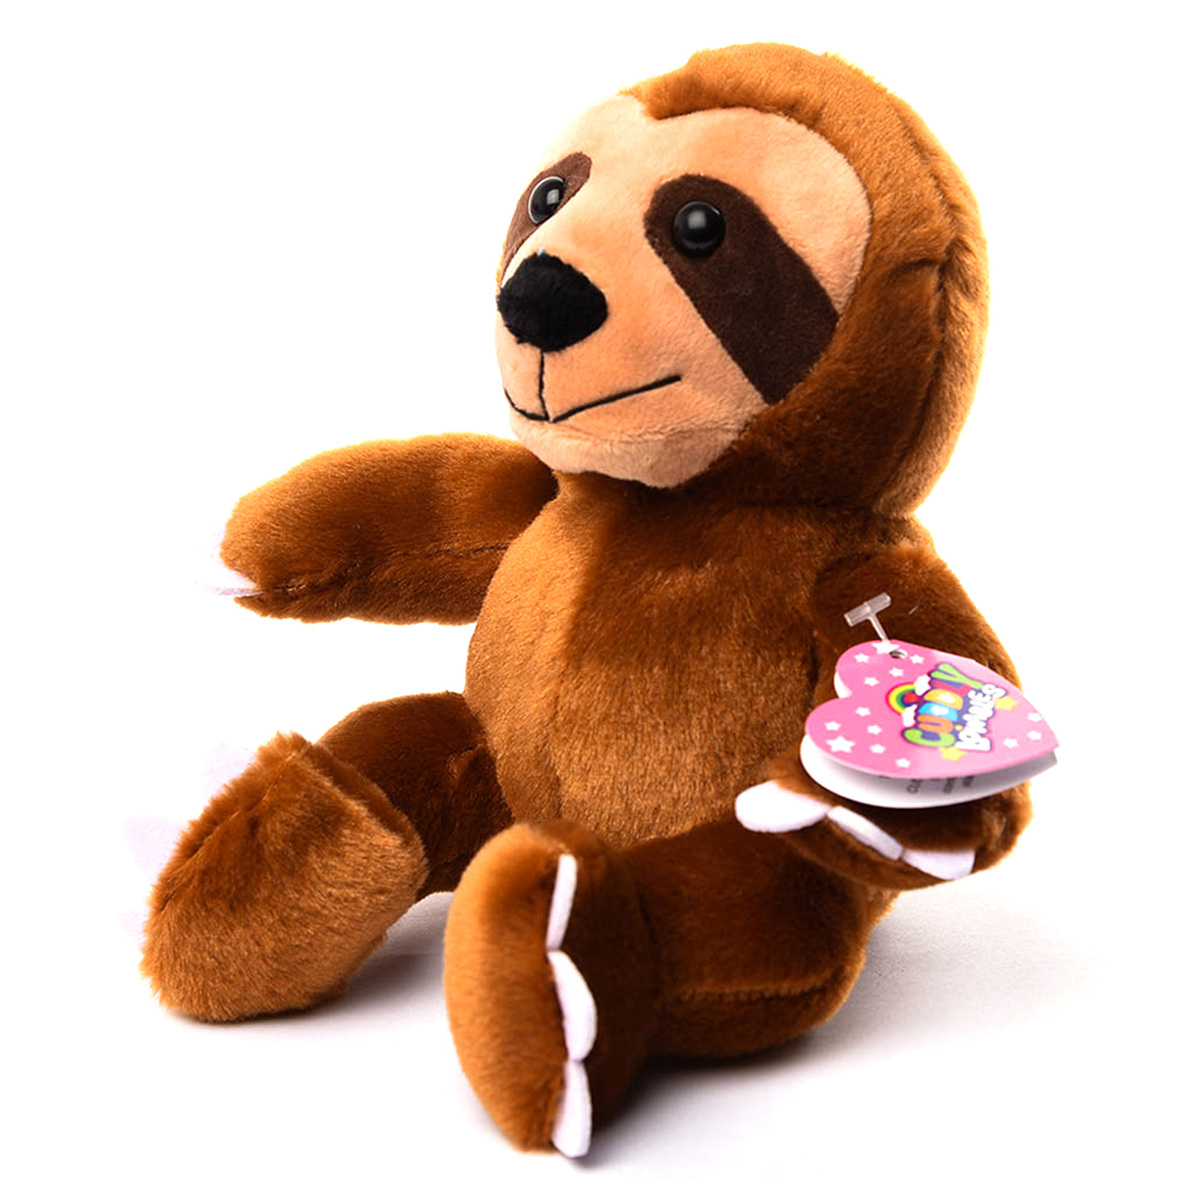 Cuddly Lovables Lazy Sloth Plush Toy, Brown,CL29